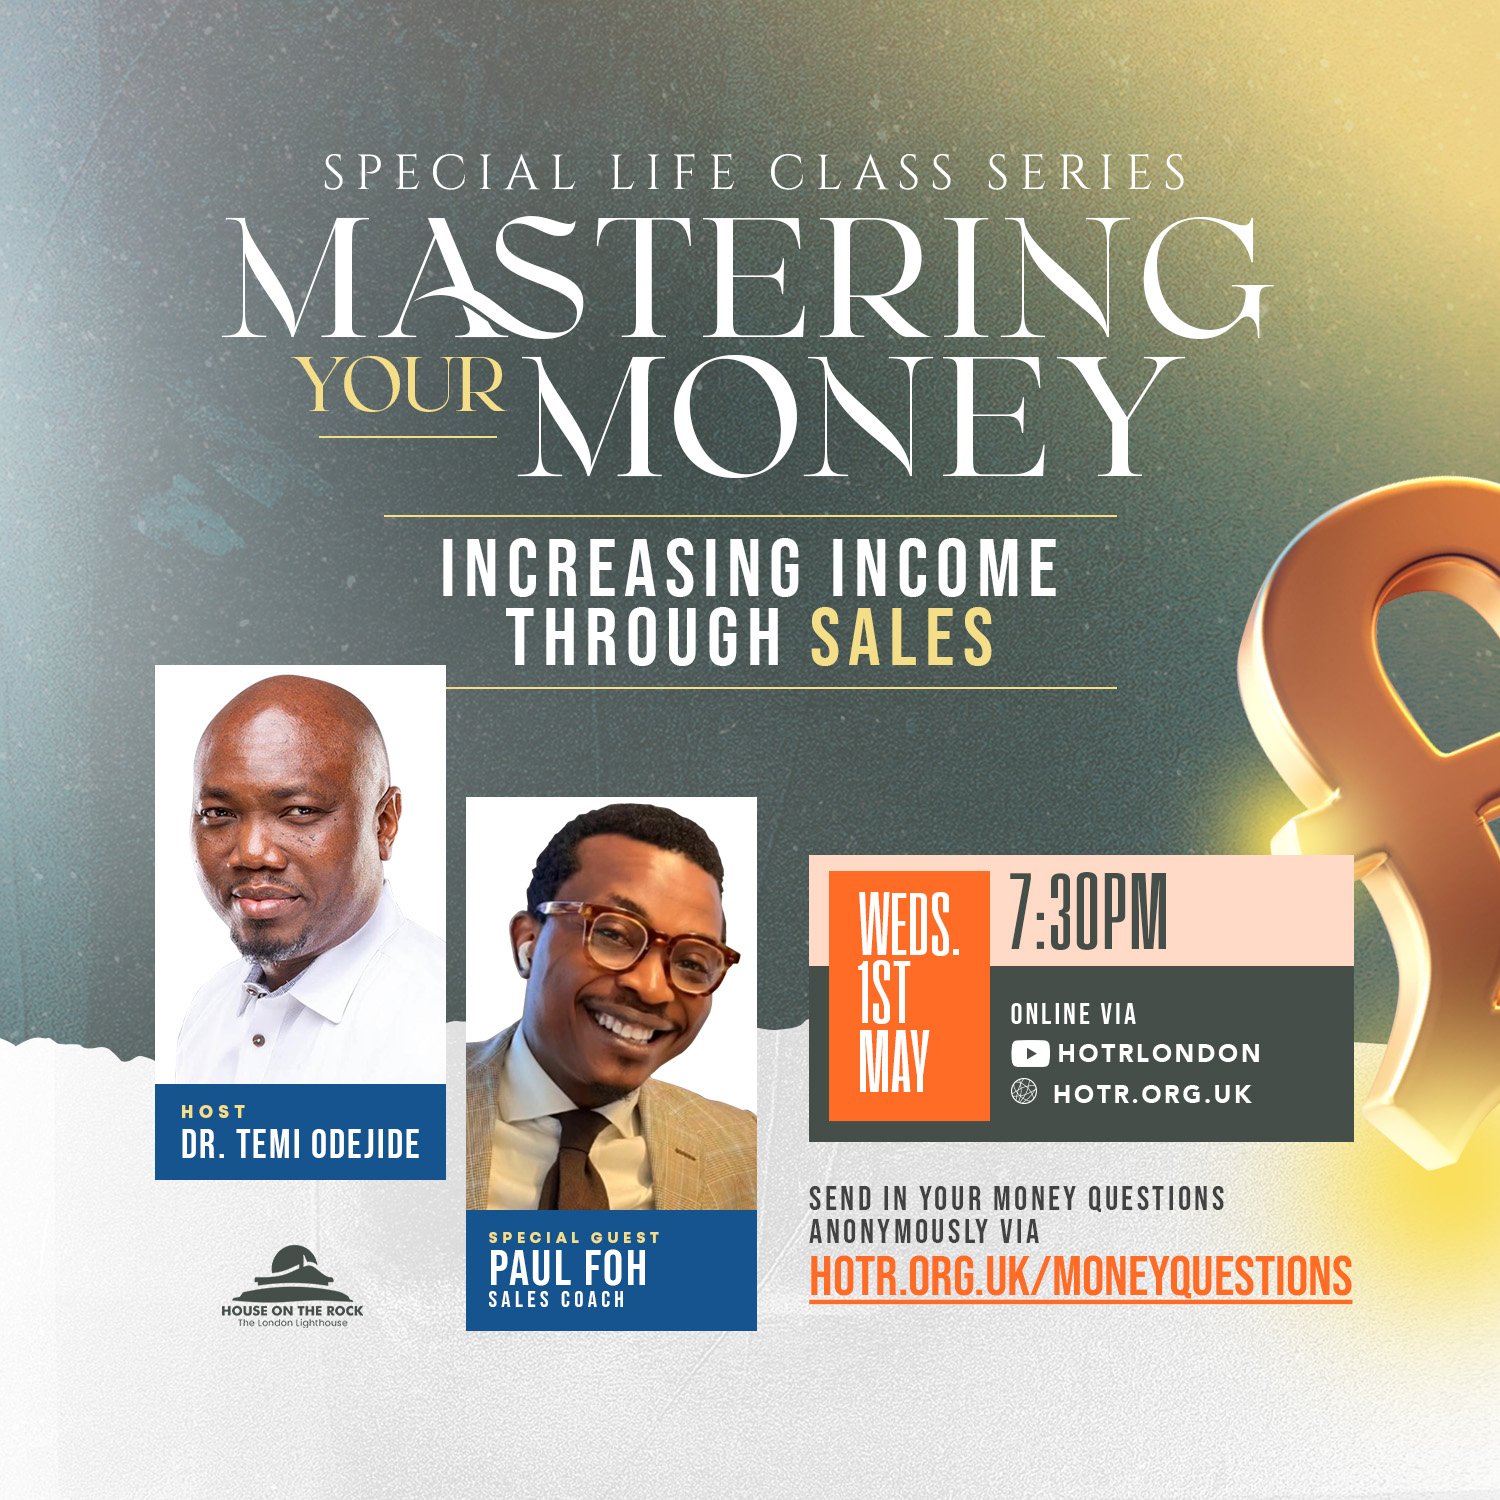 It's the final week of our &quot;Mastering Your Money&quot; Life Class and we're going to be finishing with Sales. Everyone's selling something, even if you're no aware you are. So in this week's session we'll we hearing from Sales Coach, @paulfoh on